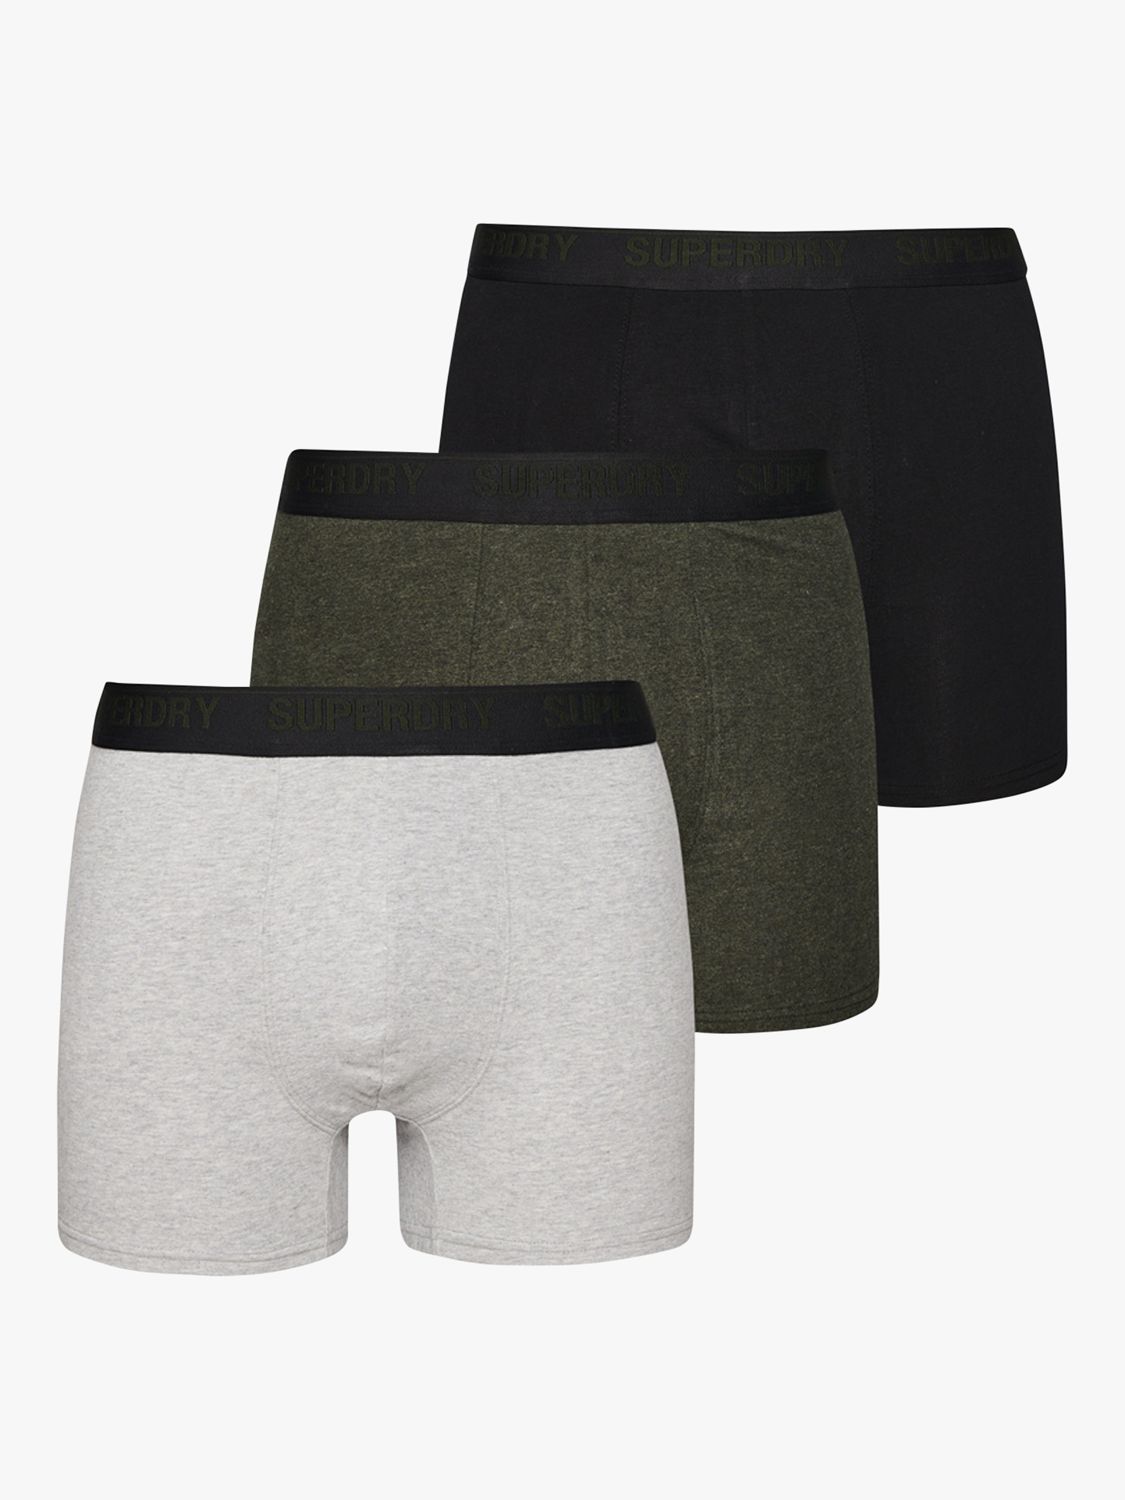 Superdry Organic Cotton Blend Trunks, Pack of 3 at John Lewis & Partners